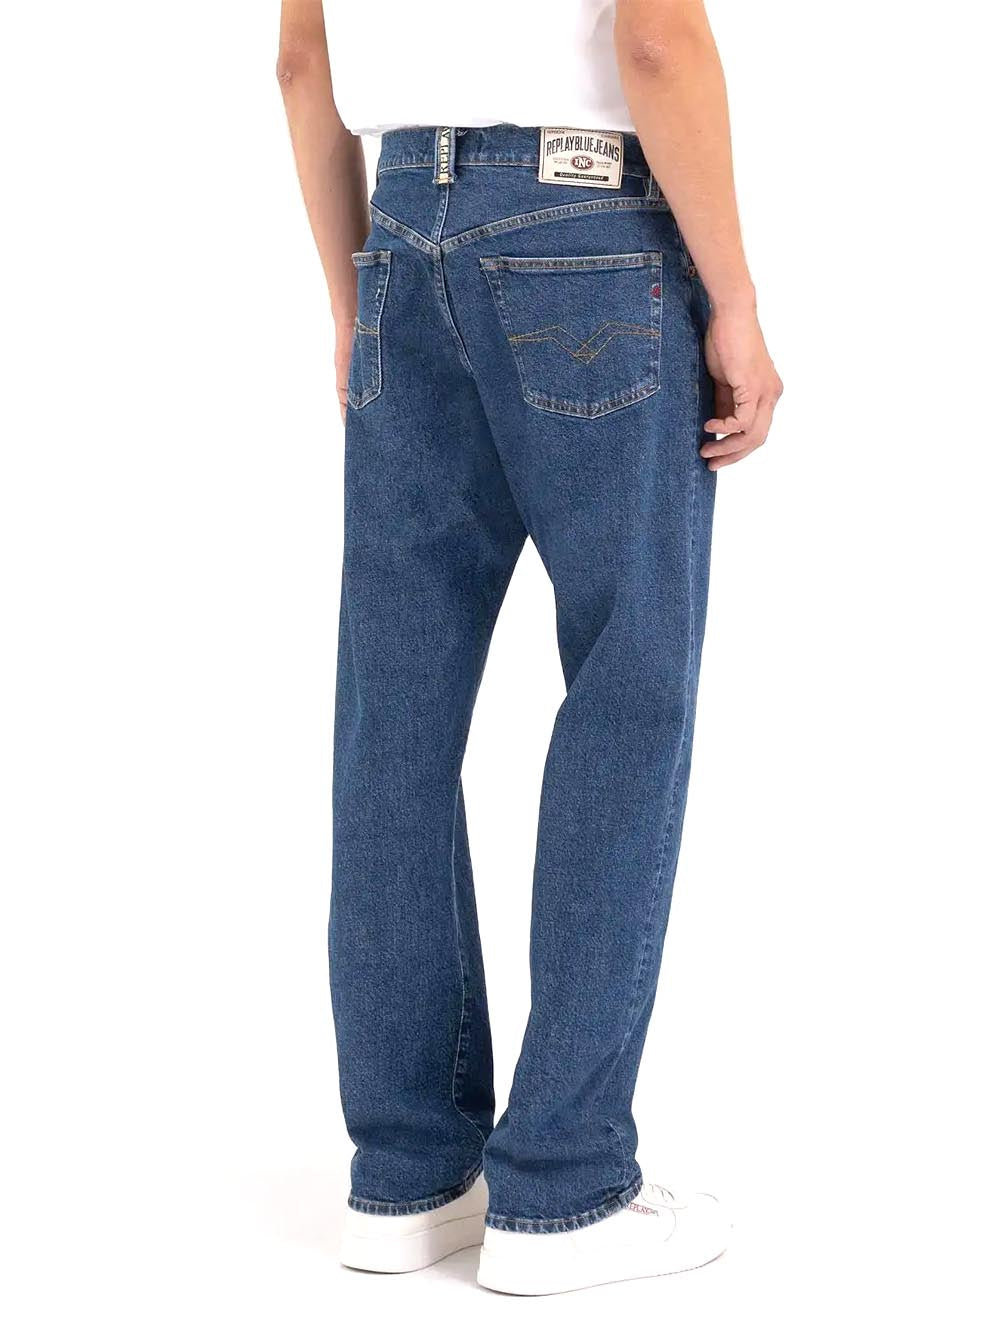 Replay Jeans Uomo M9z1 .000.759 52d Scuro